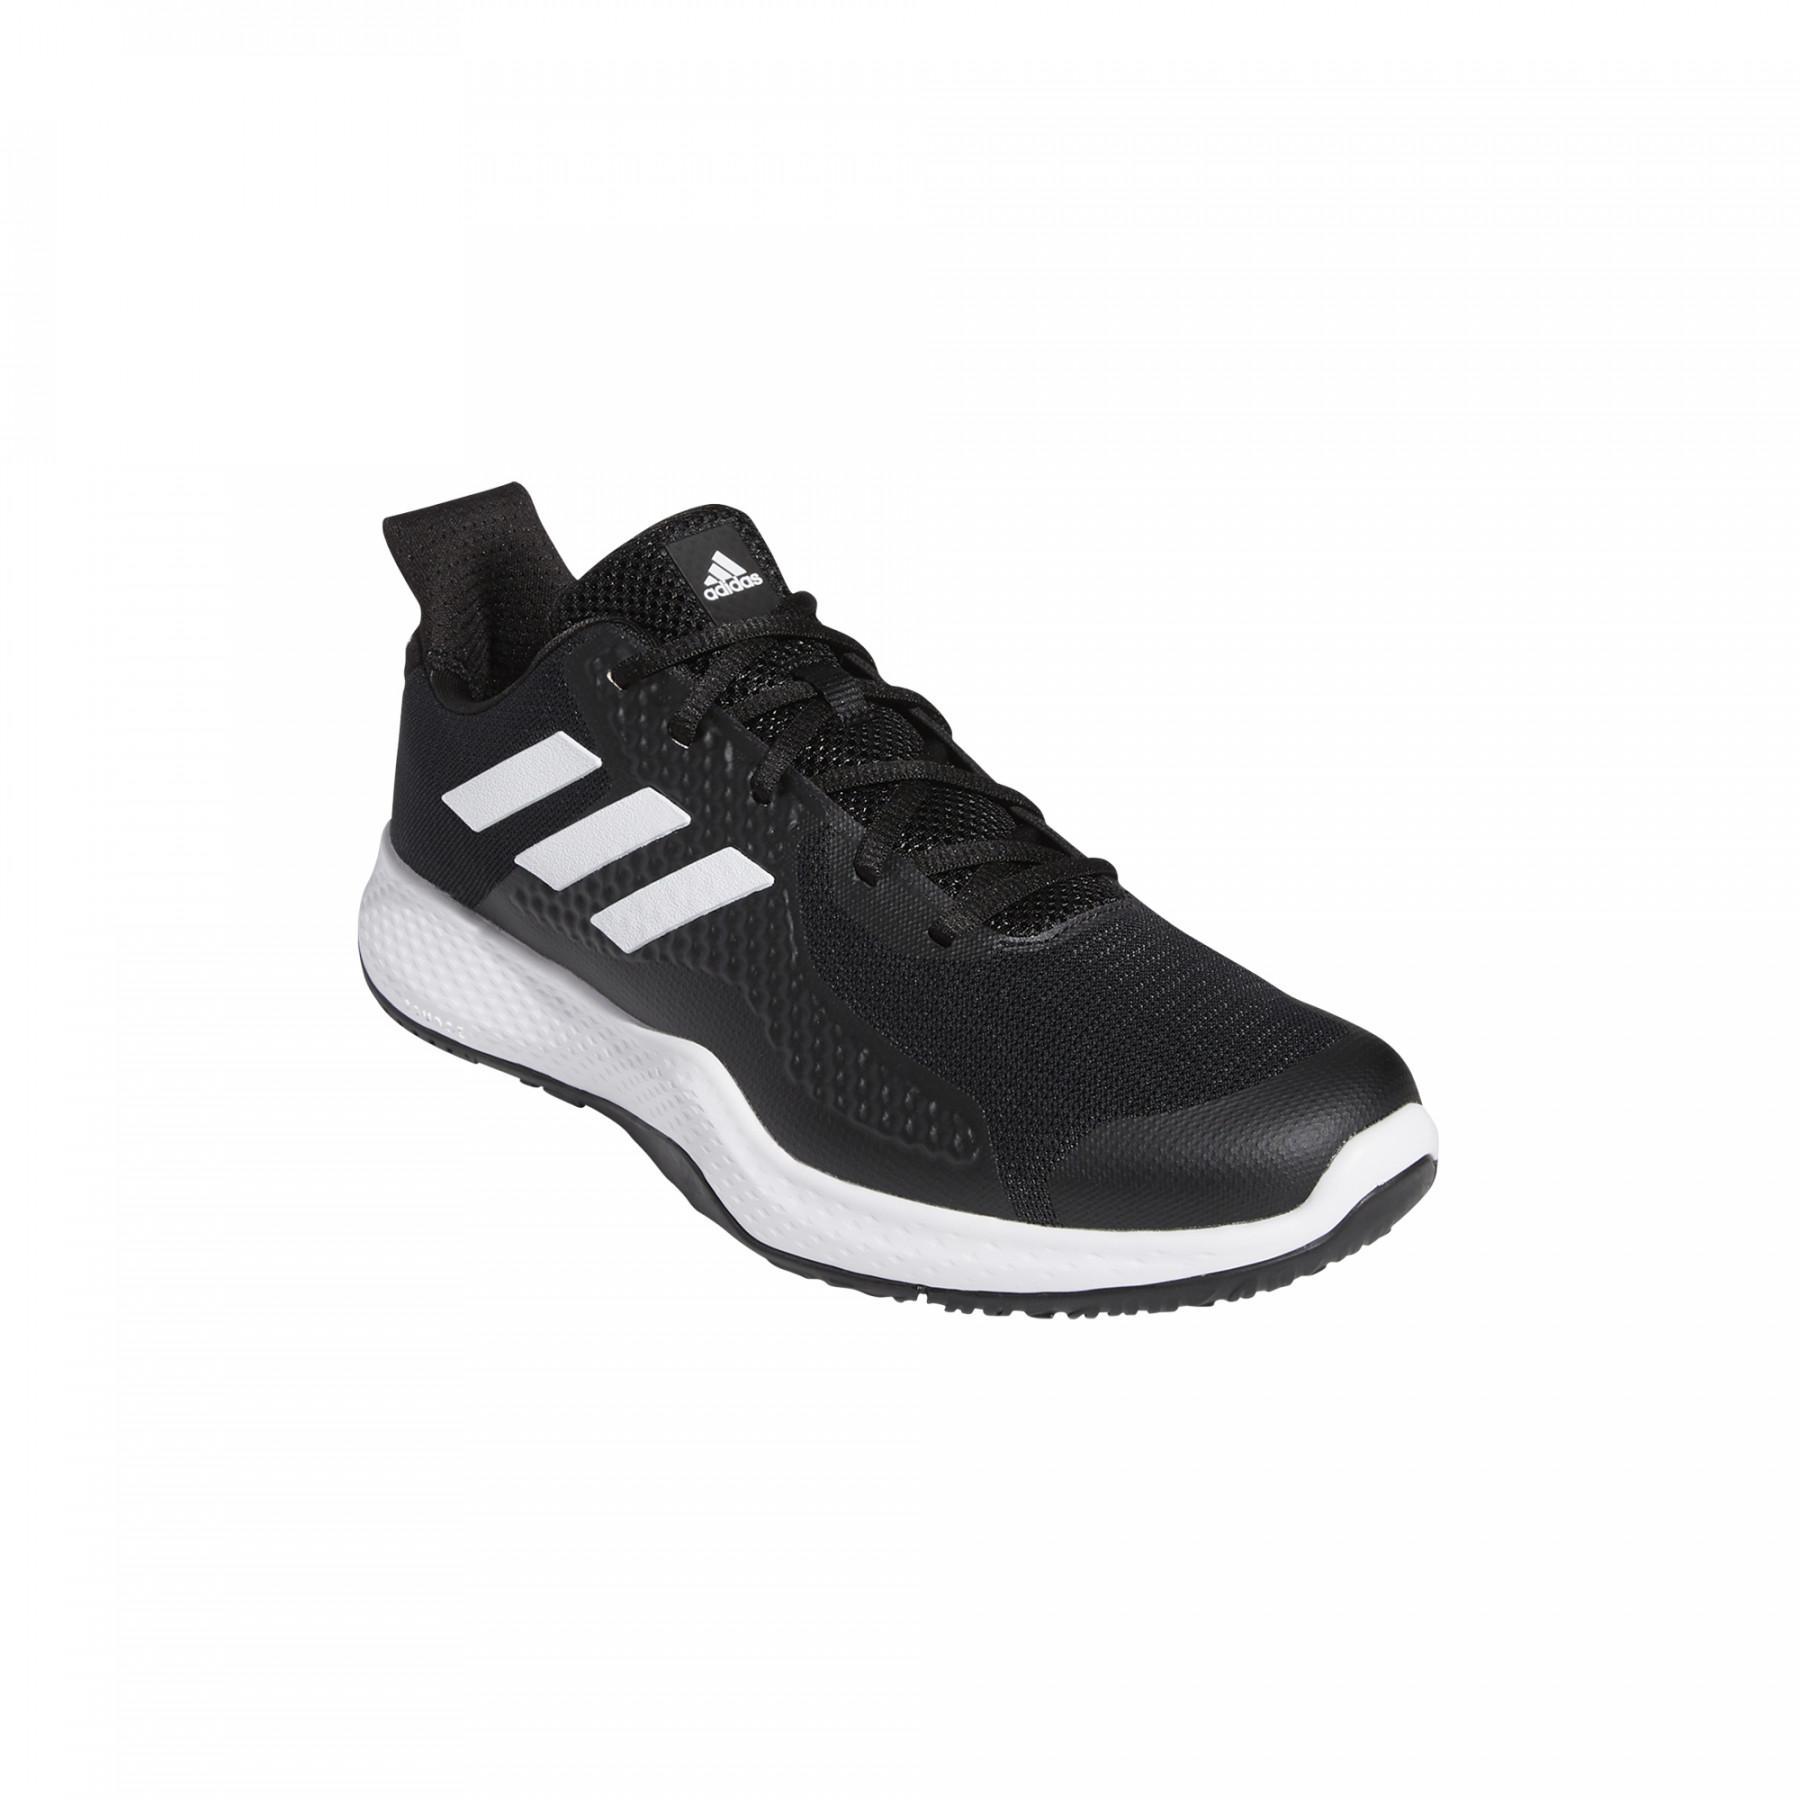 Chaussures de running adidas FitBounce Trainers